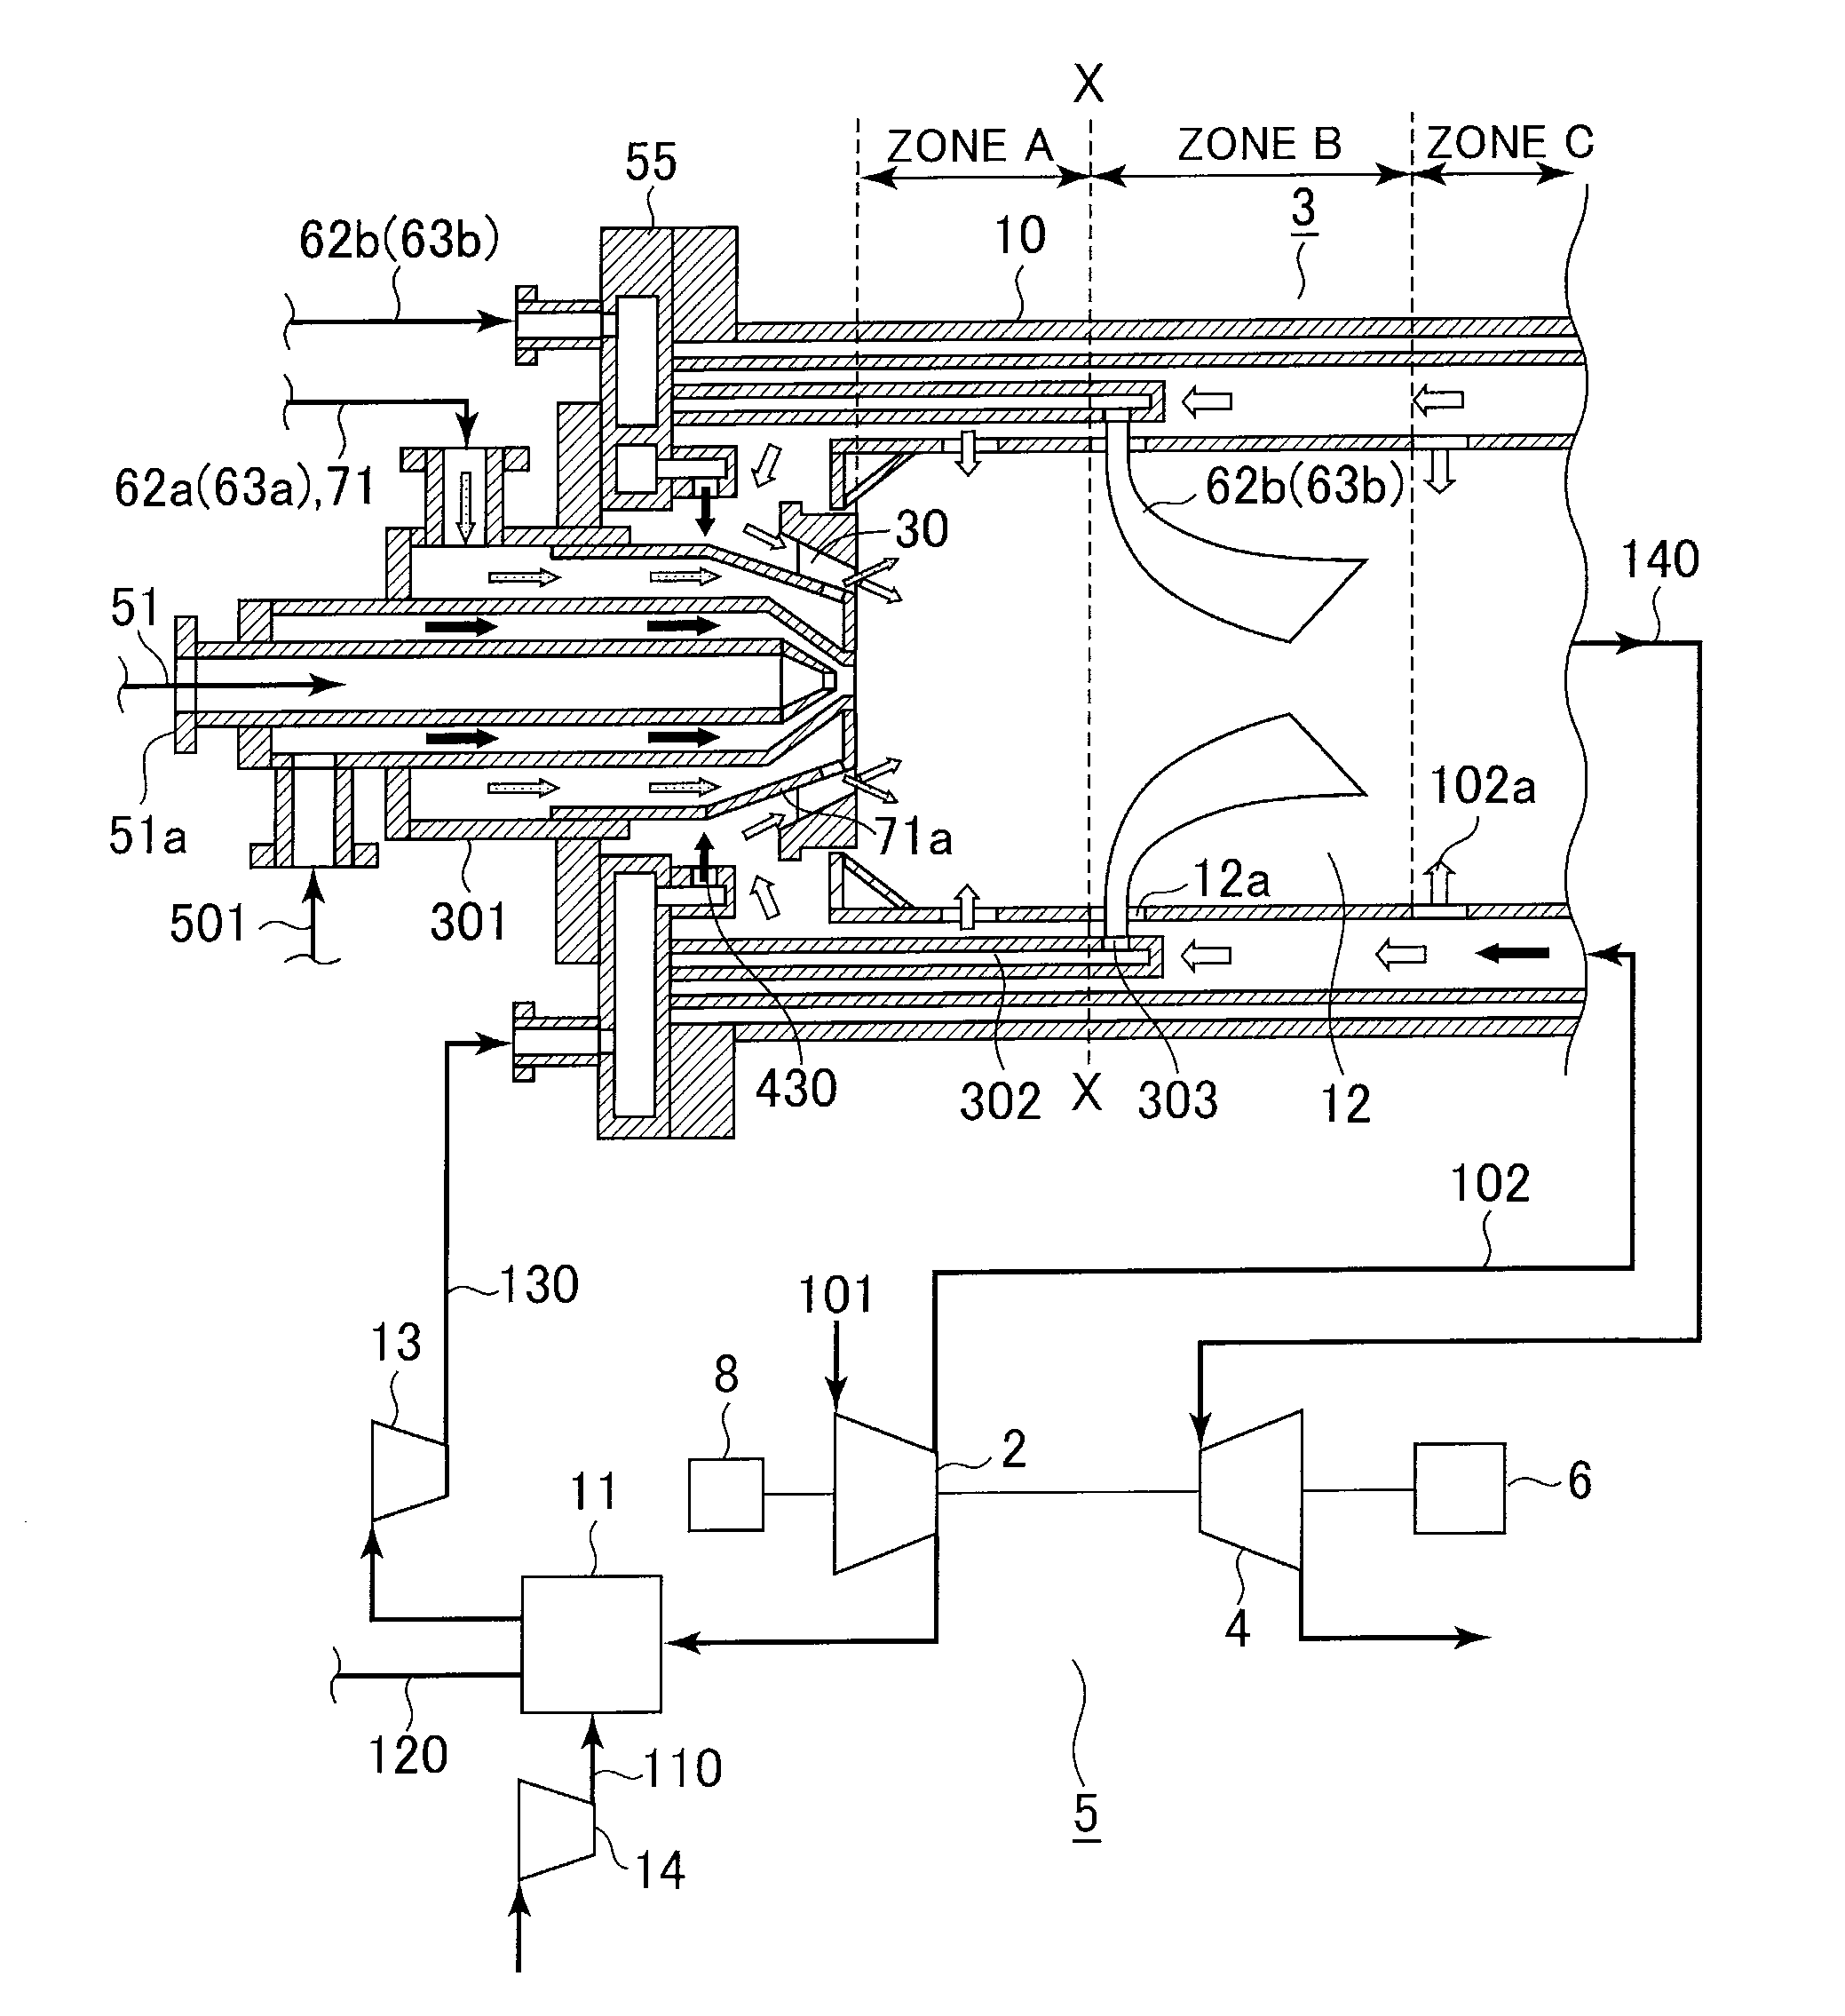 Low NOx Combustor for Hydrogen-Containing Fuel and its Operation